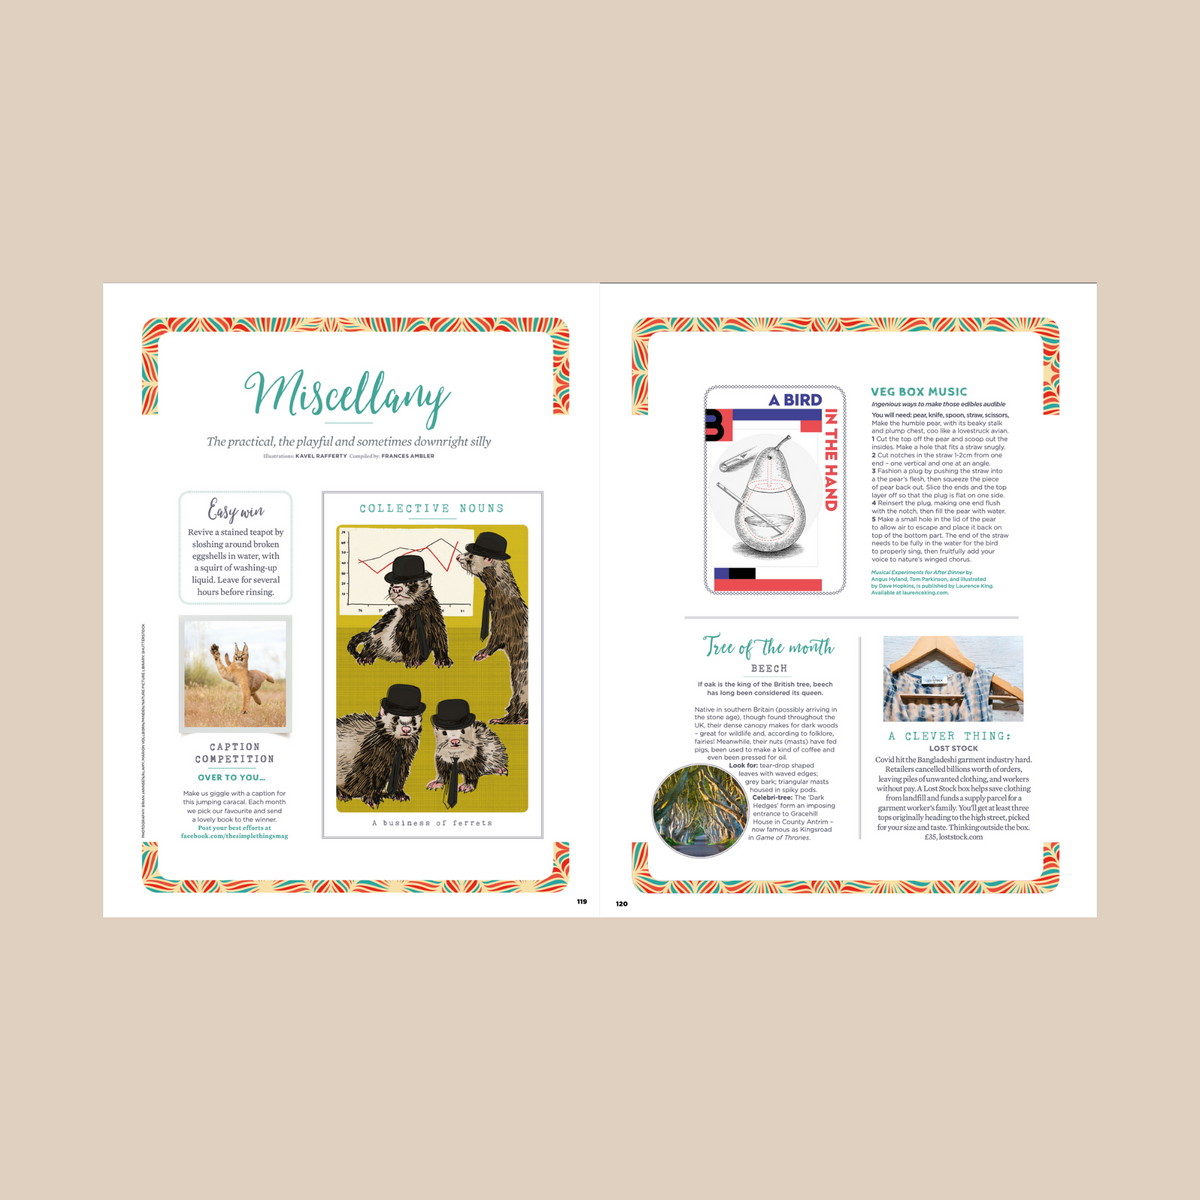 The Simple Things September Issue 99